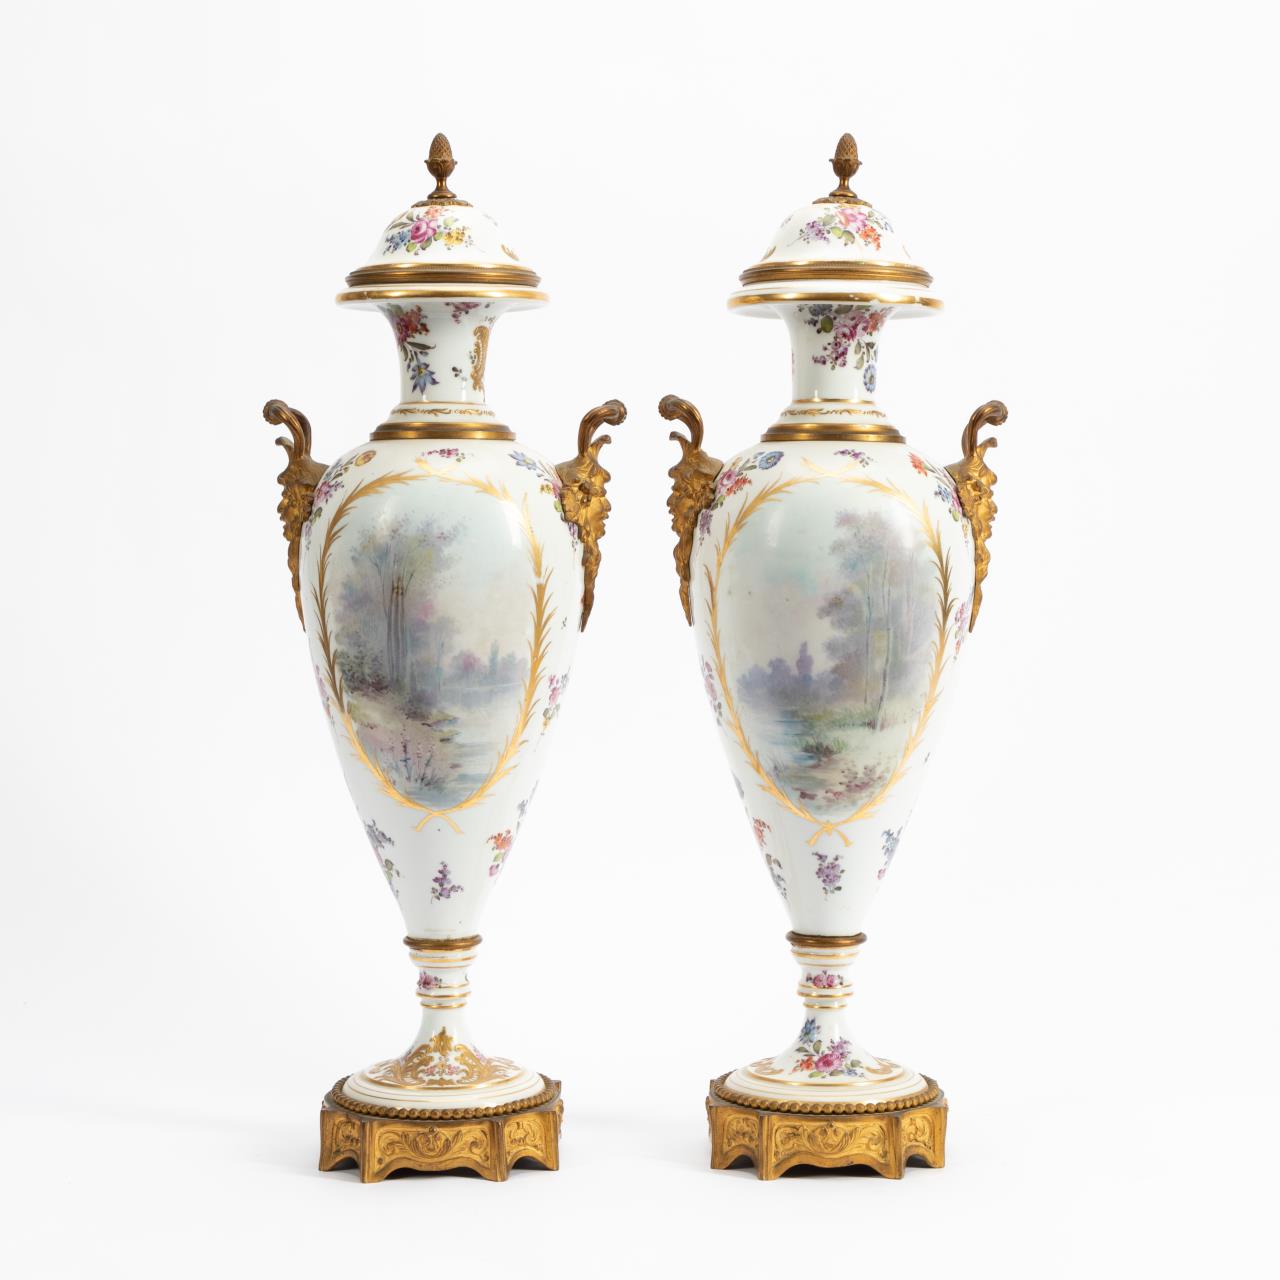 PR., SEVRES STYLE SIGNED HAND-PAINTED